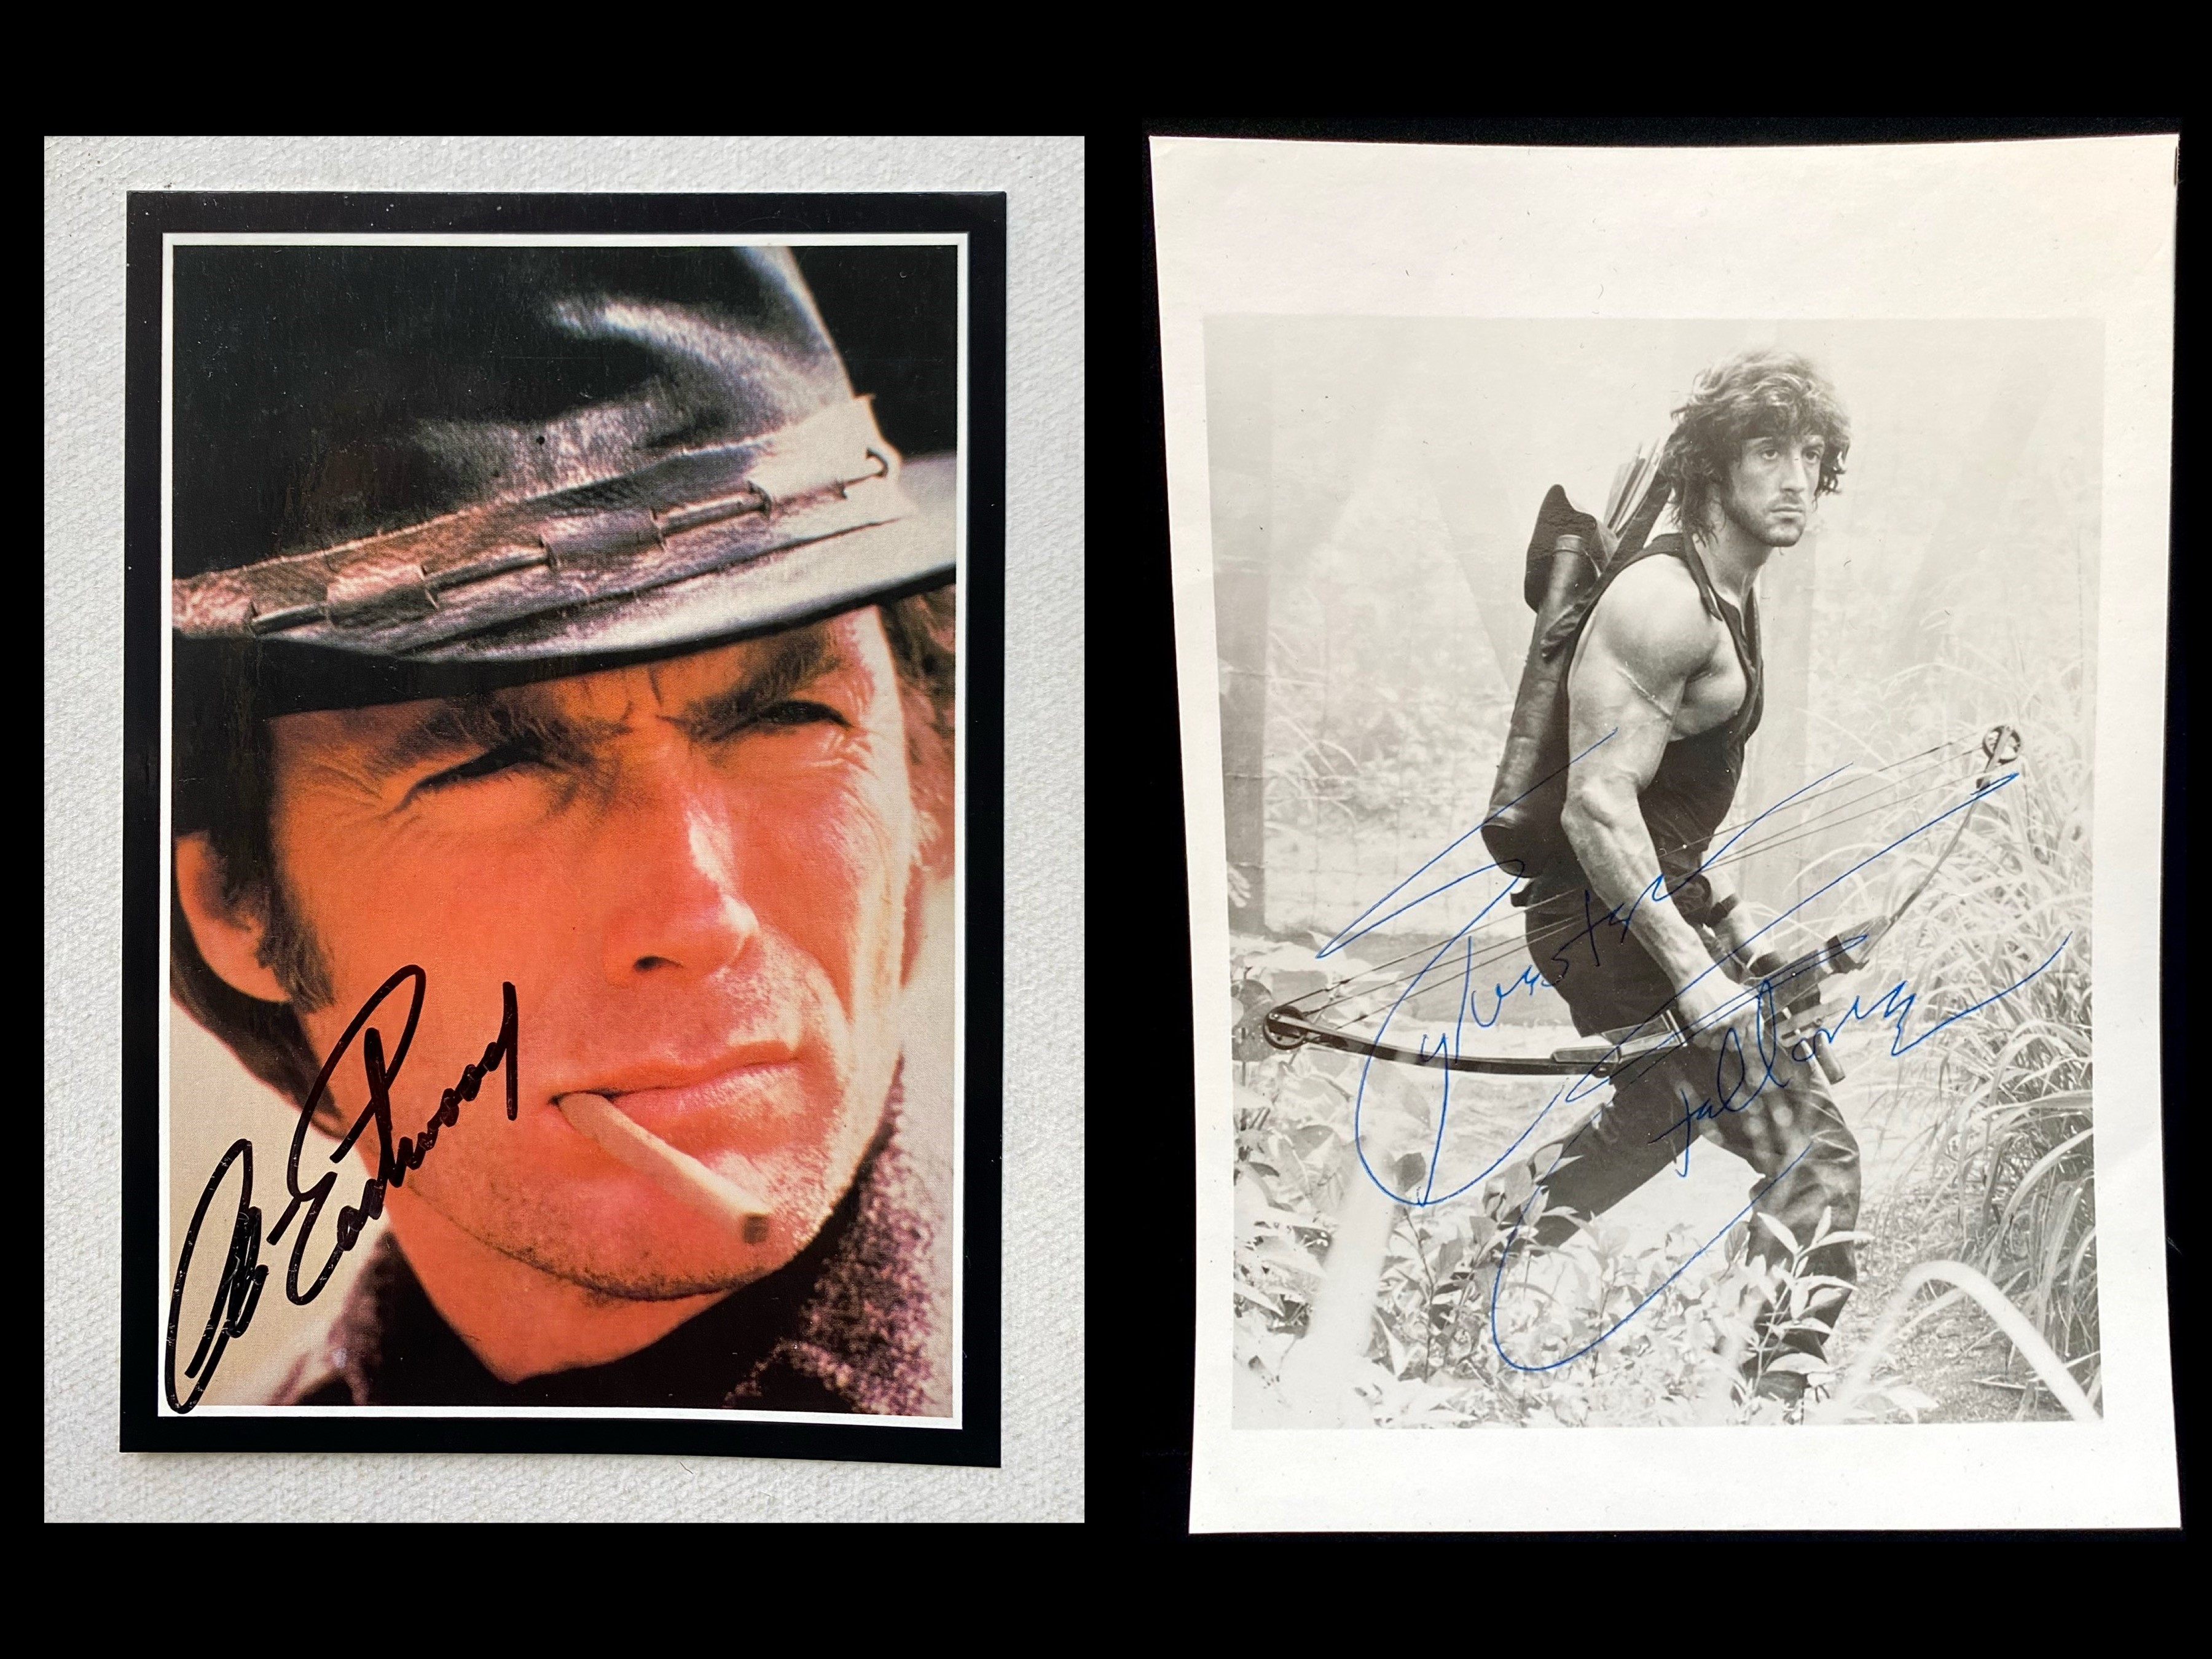 Clint Eastwood Interest - Photographs of Clint Eastwood as Dirty Harry, photographs signed. - Image 2 of 4